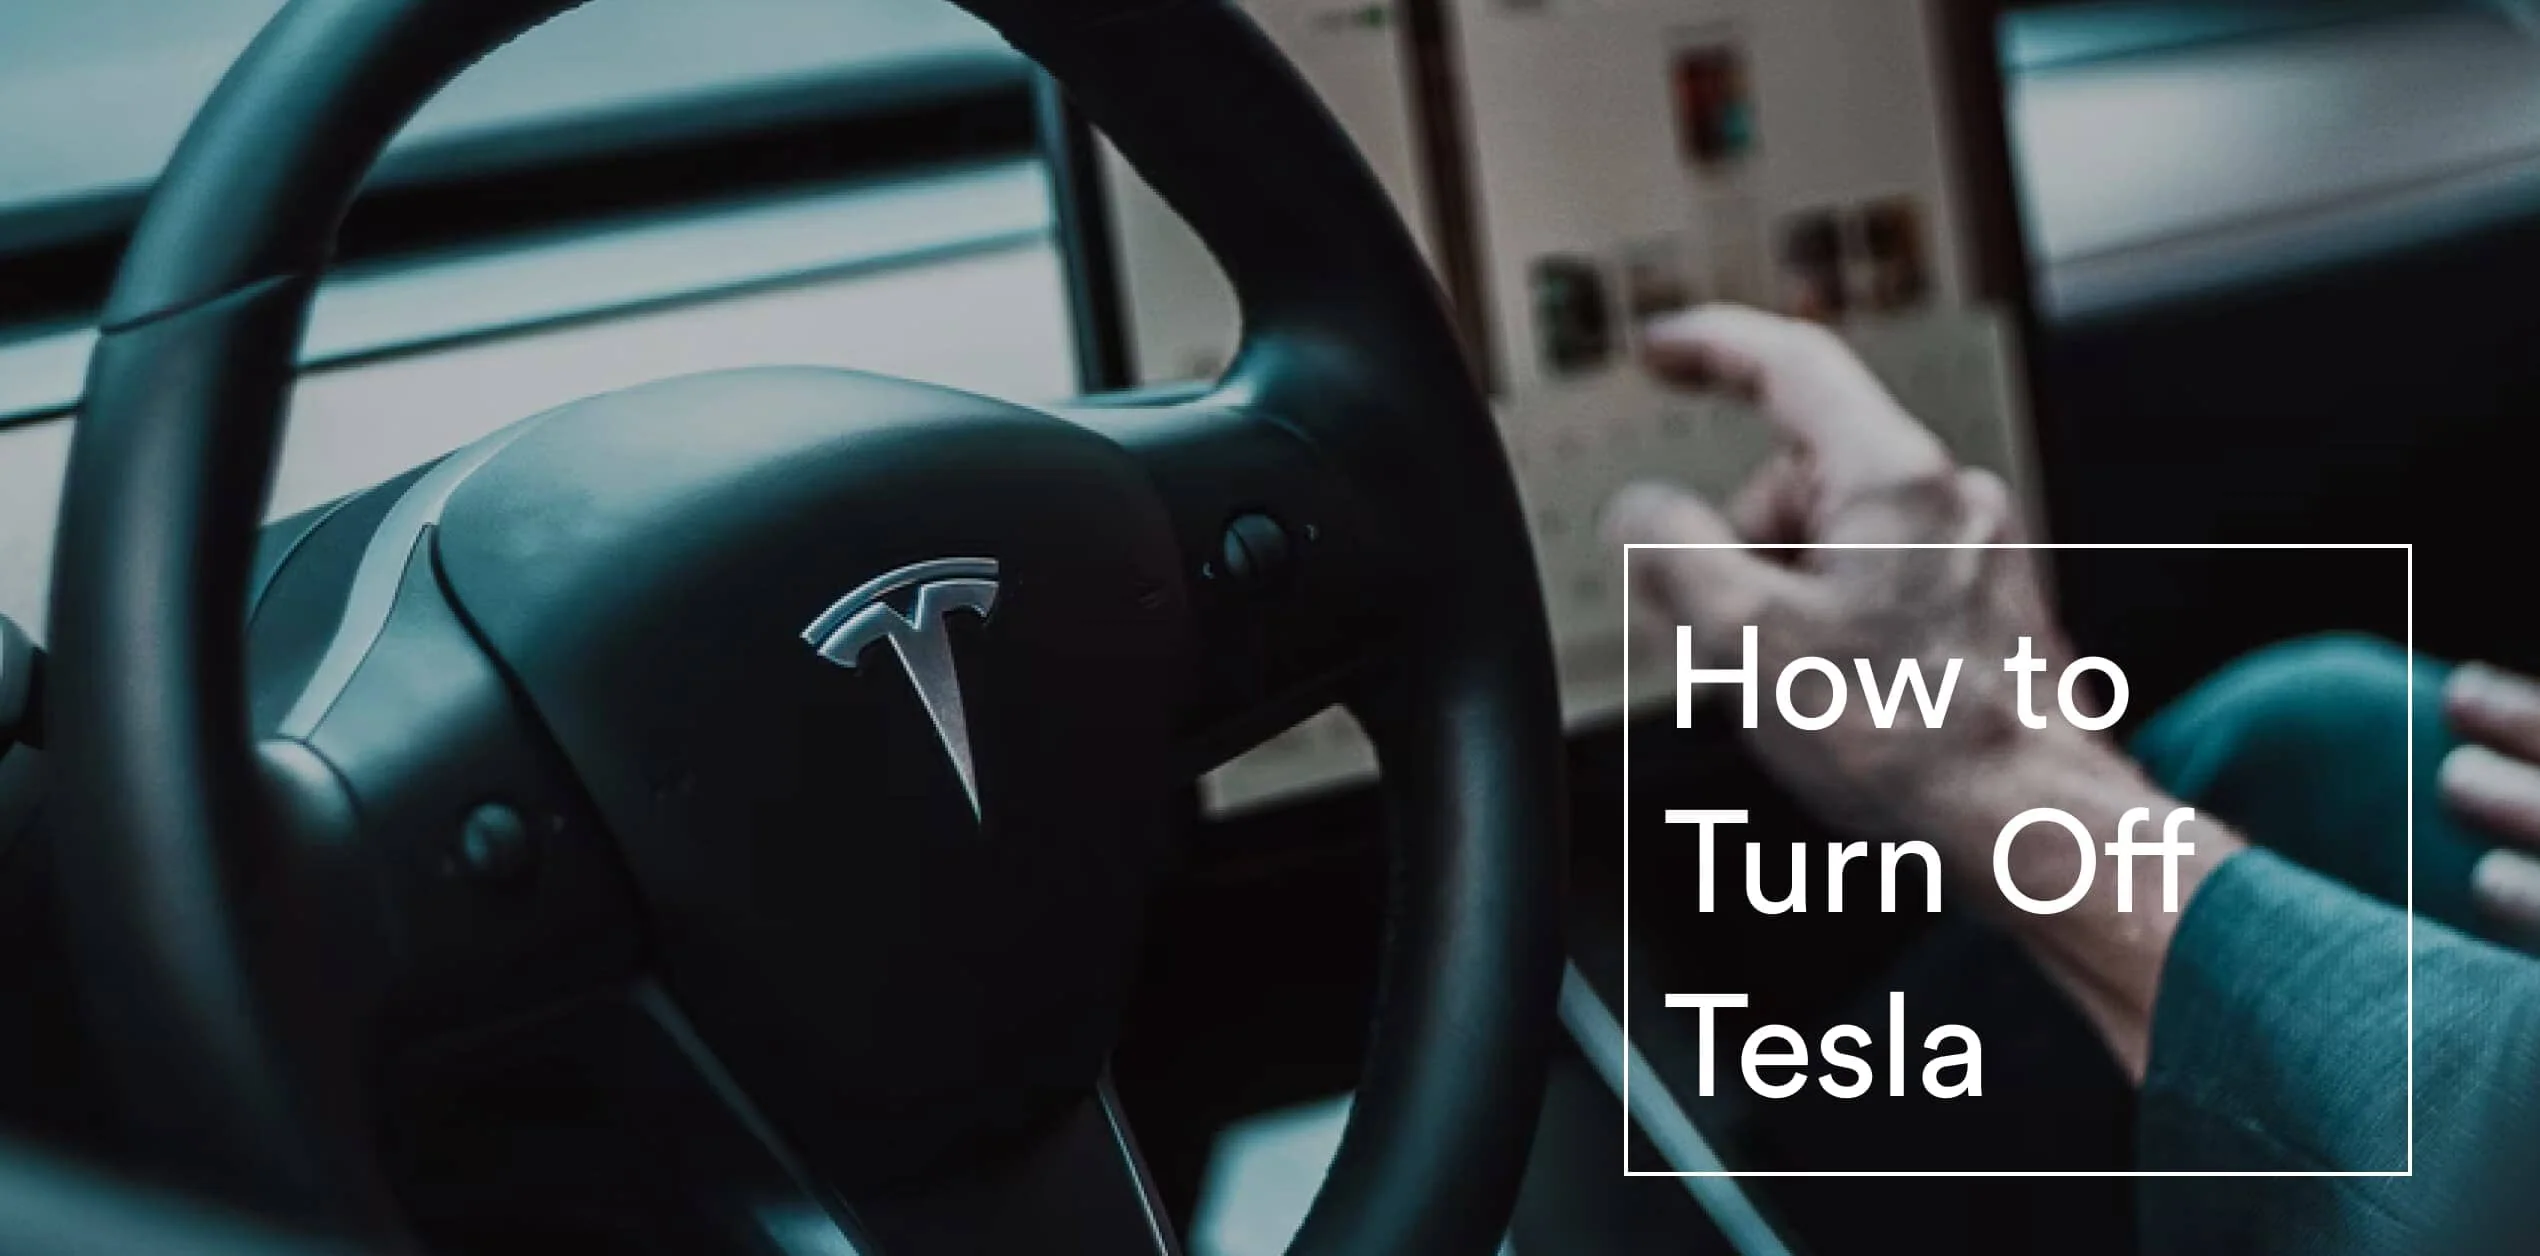 How Do You Turn Off a Tesla: Simple Steps to Power Down Your EV